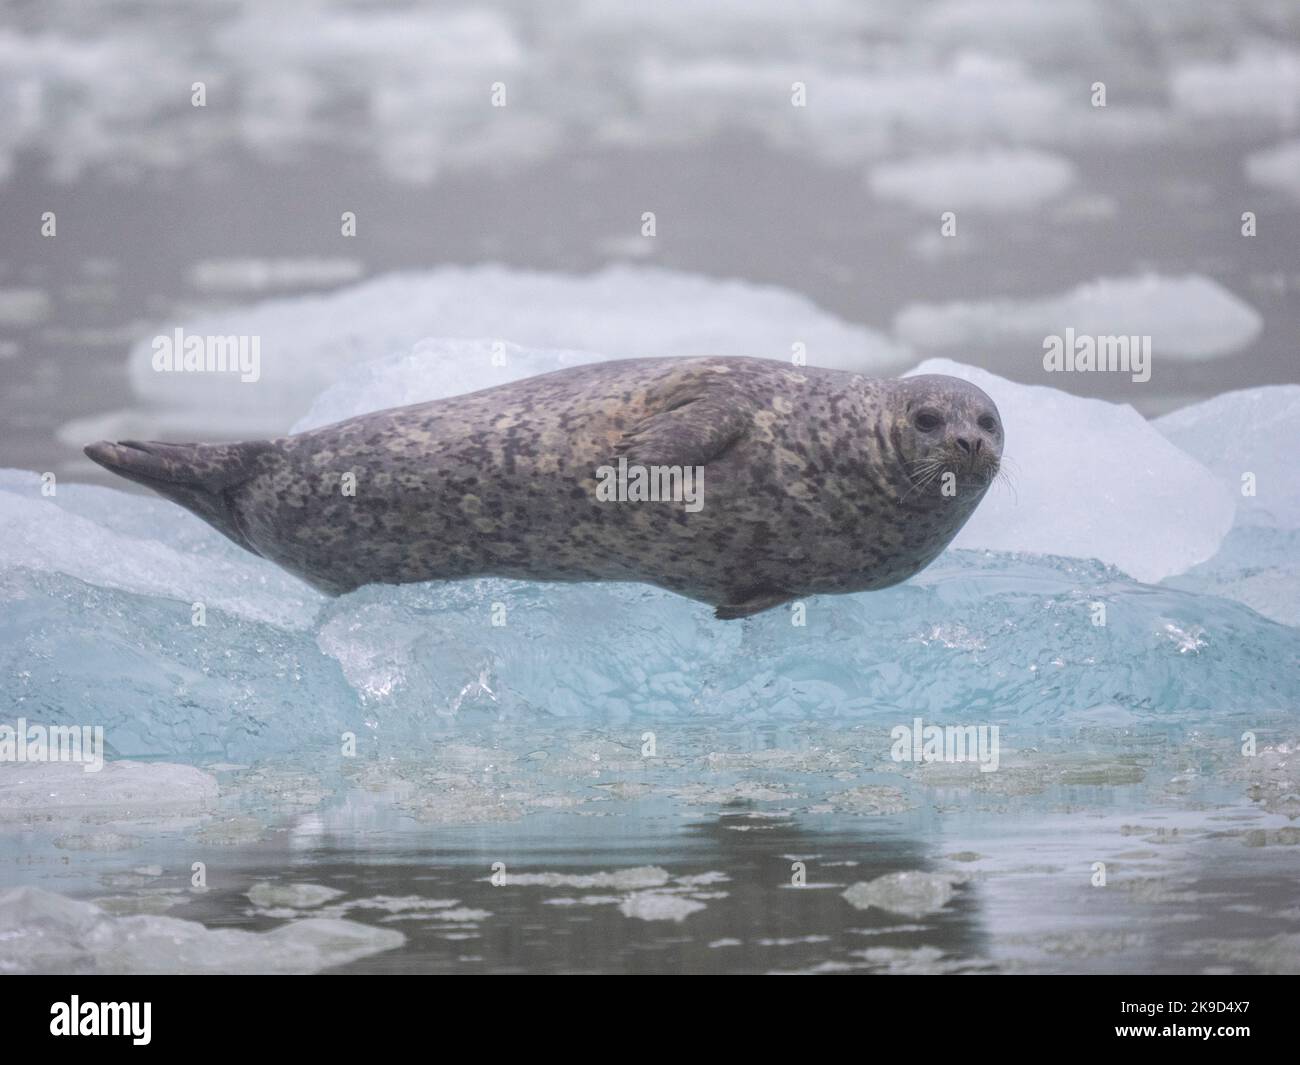 Harbour Seal, Le Conte Glacier, Tongass National Forest, Alaska. Stockfoto